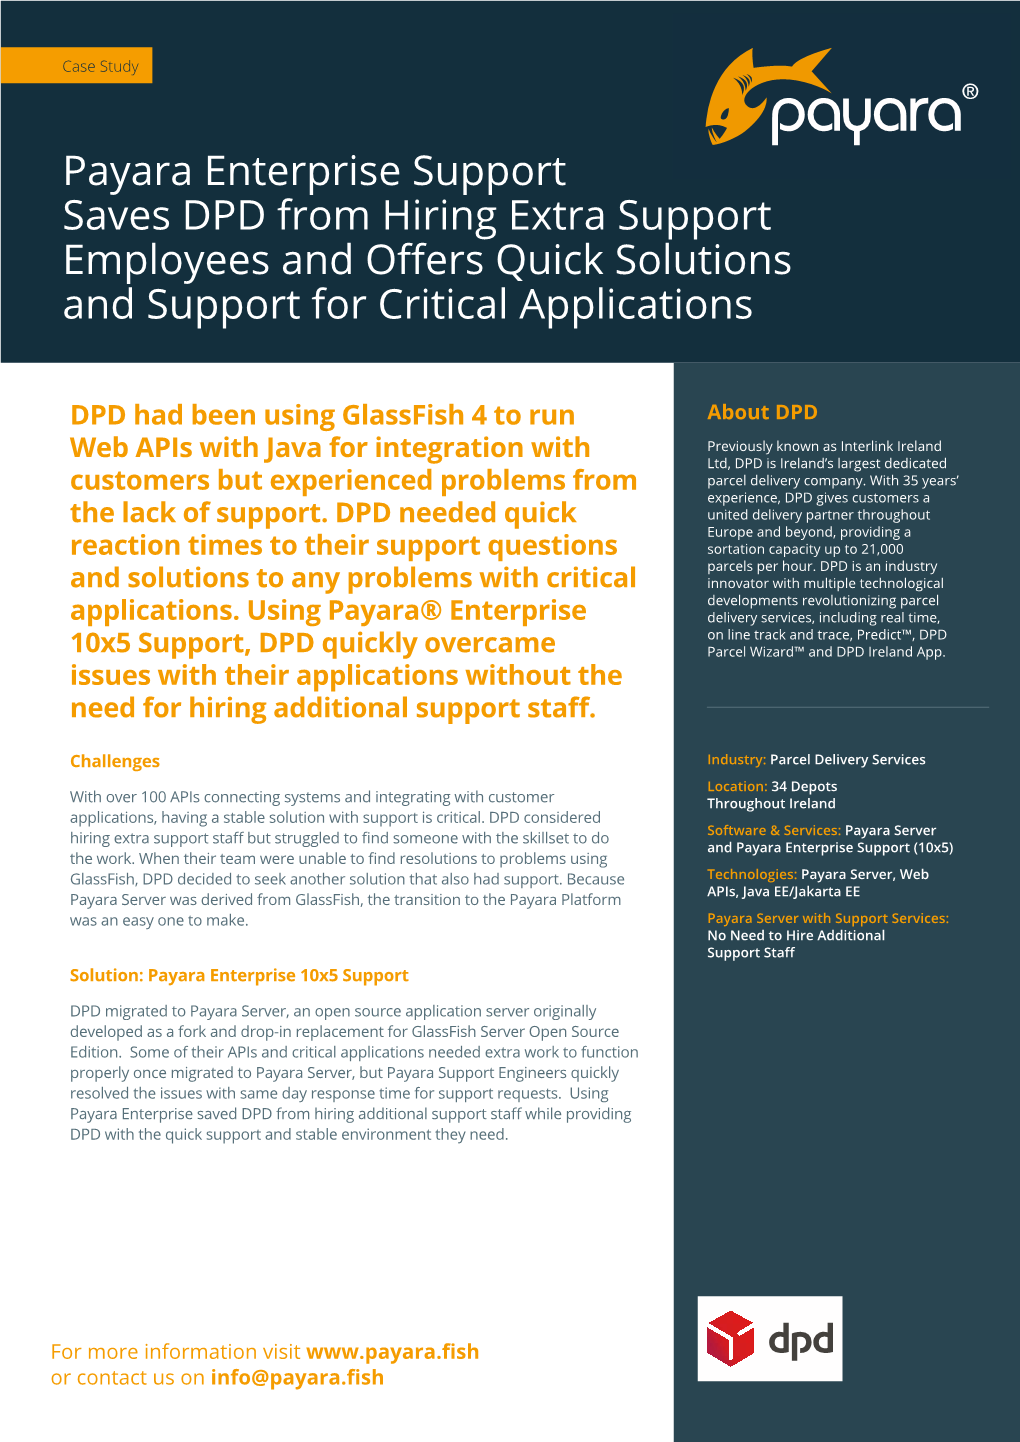 Payara Enterprise Support Saves DPD from Hiring Extra Support Employees and Offers Quick Solutions and Support for Critical Applications